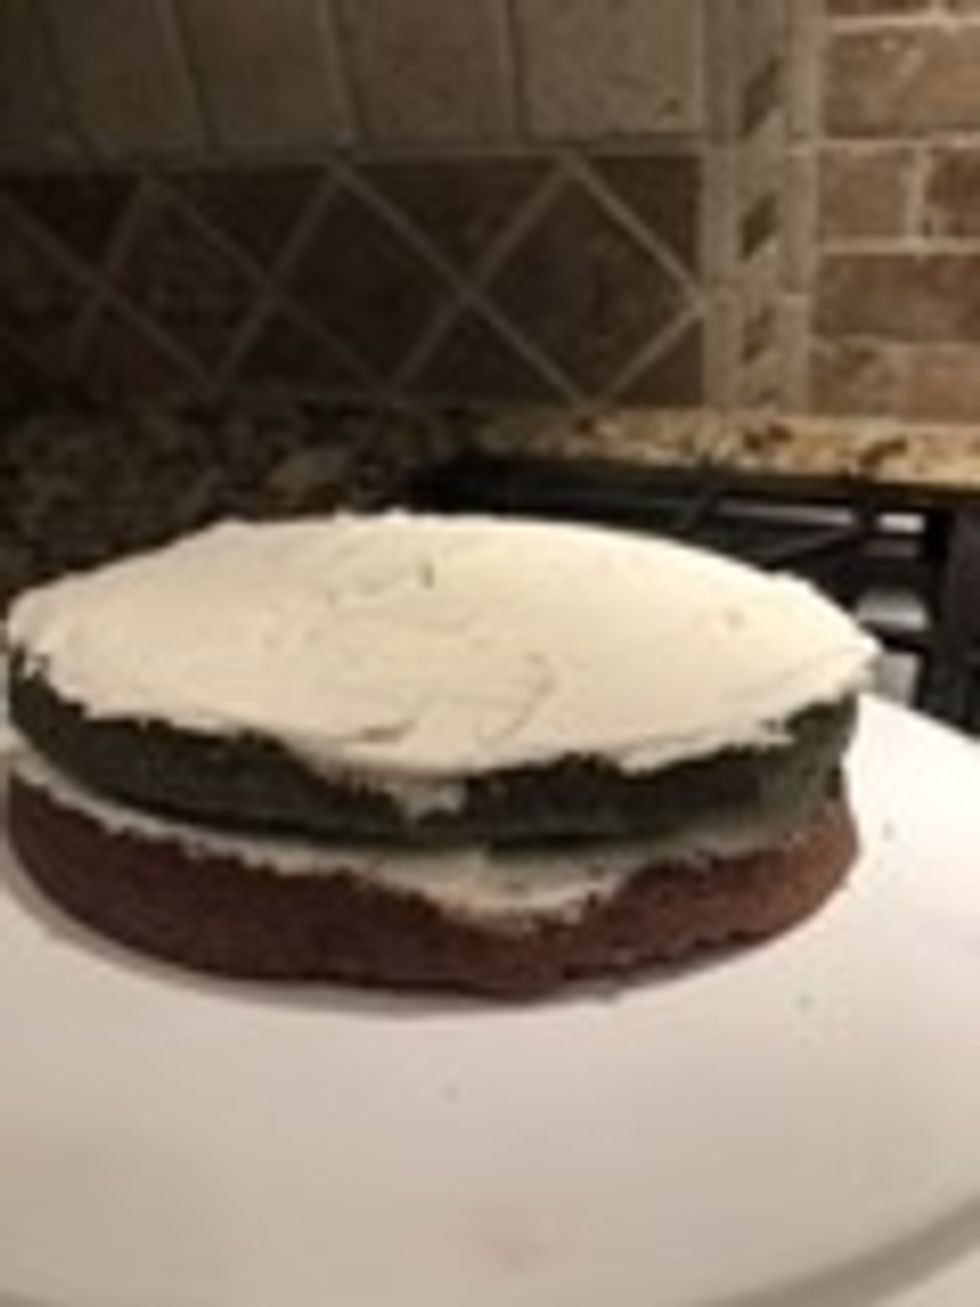 Put icing in top of the blue layer until fully covered.